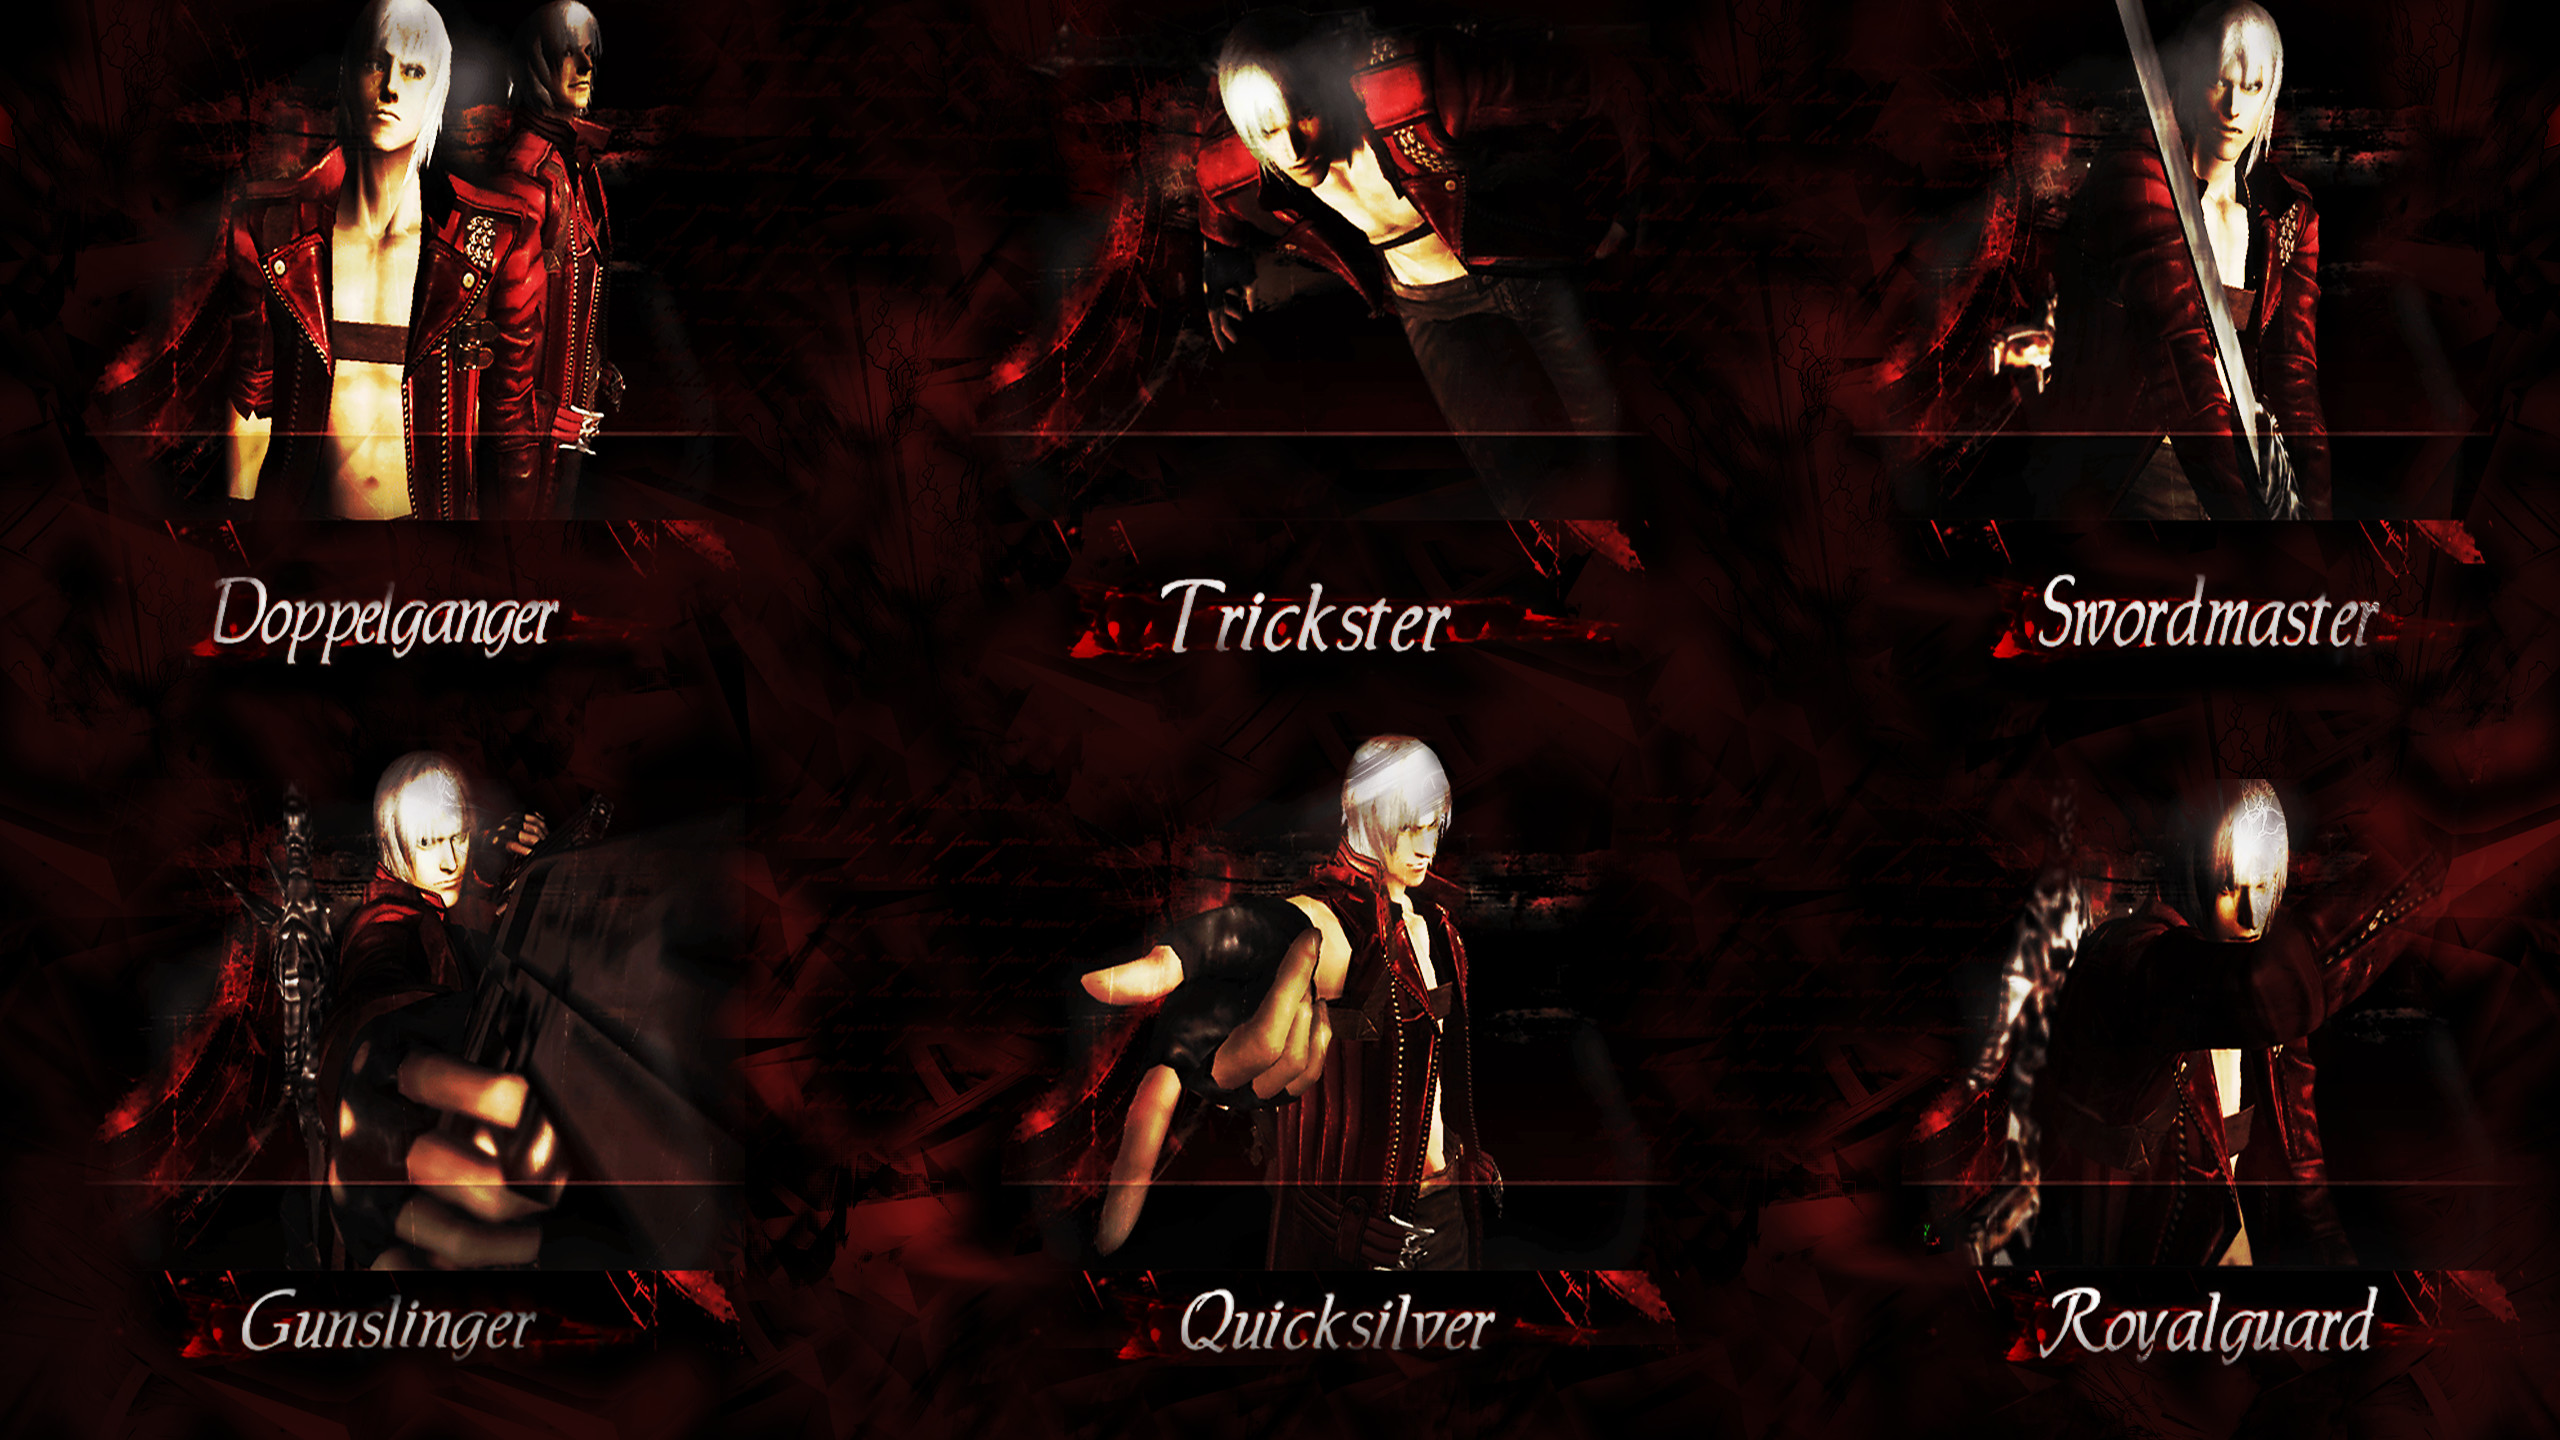 2560x1440 ... Devil May Cry 3 SE - Style Wallpaper Version 2 by Elvin-Jomar